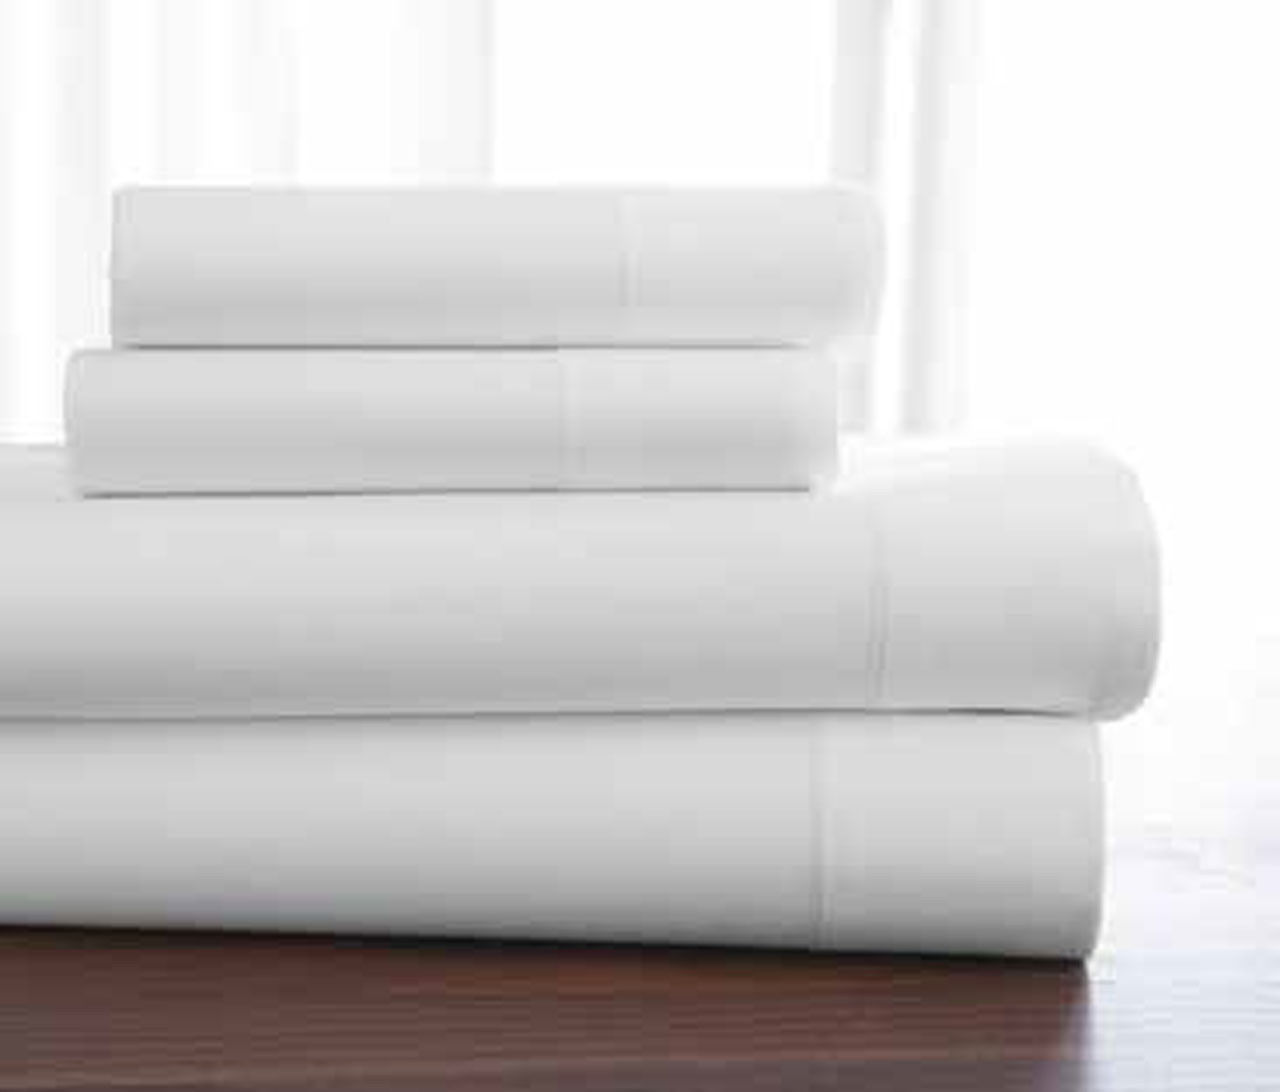 What features are included in the Welspun T-400 Premium hygrocotton sheets?